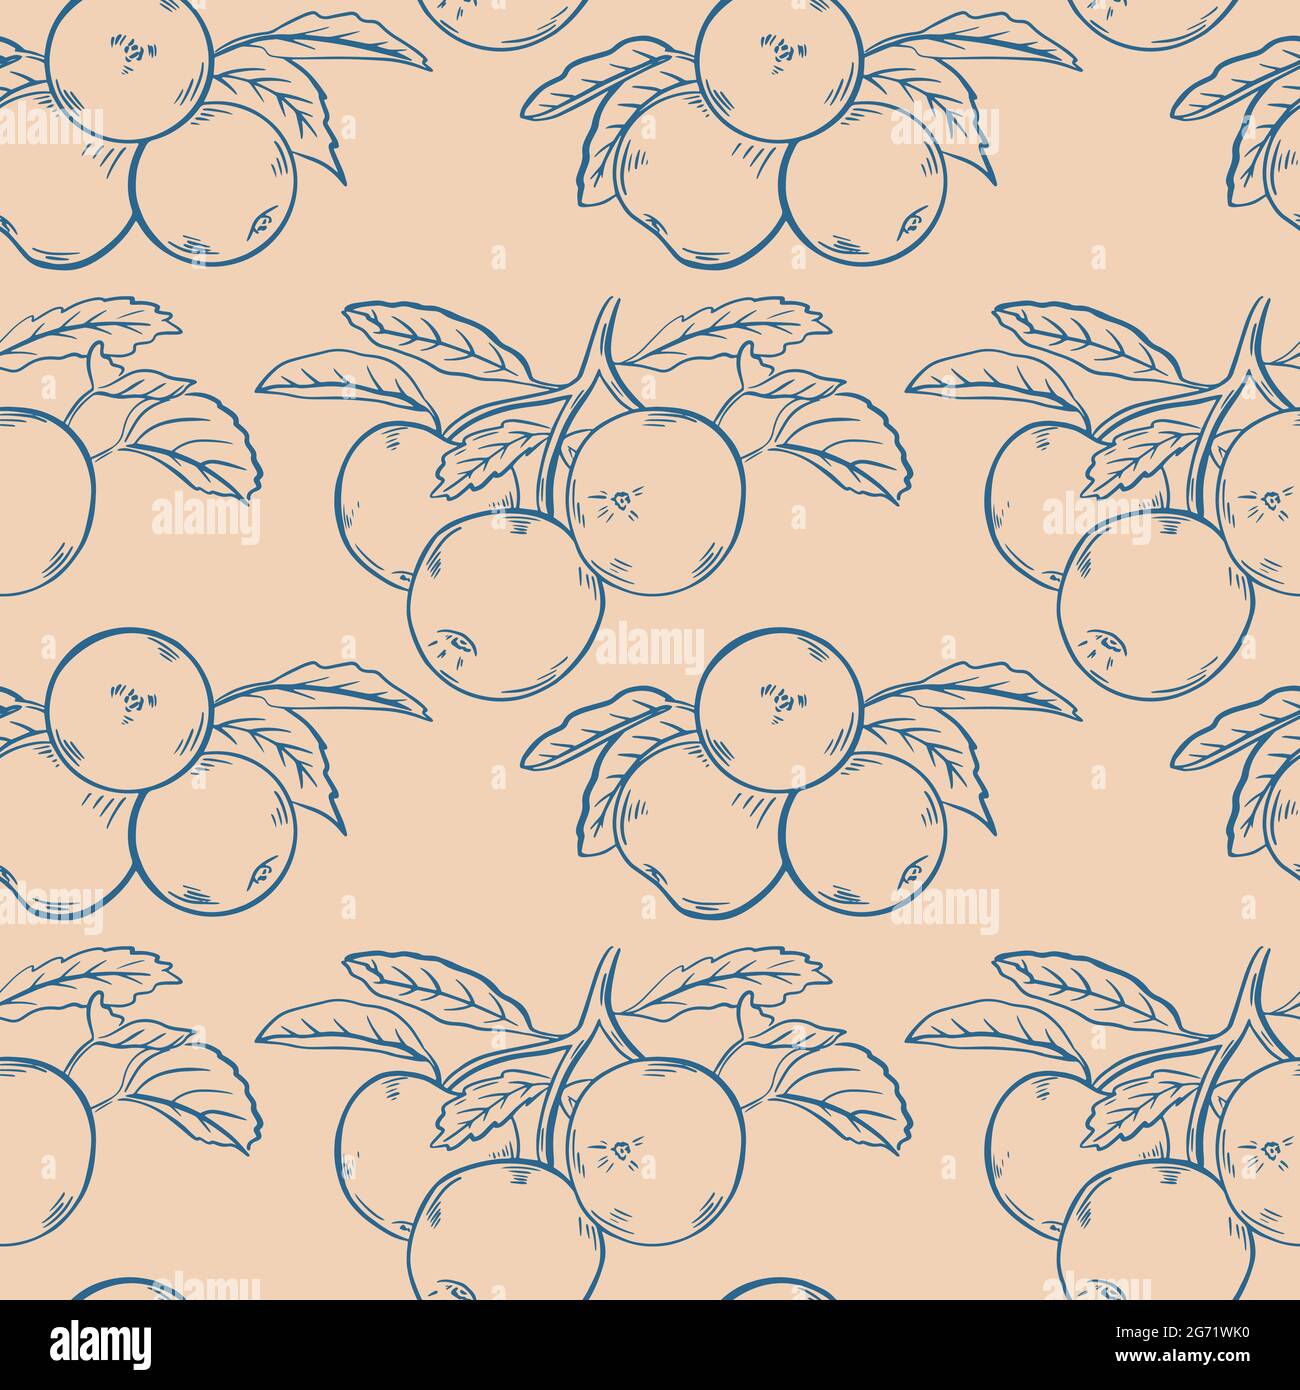 Sketch apples seamless pattern, vector illustration. Fruit on a branch with leaves, vintage graphic background. Healthy organic food. Stock Vector